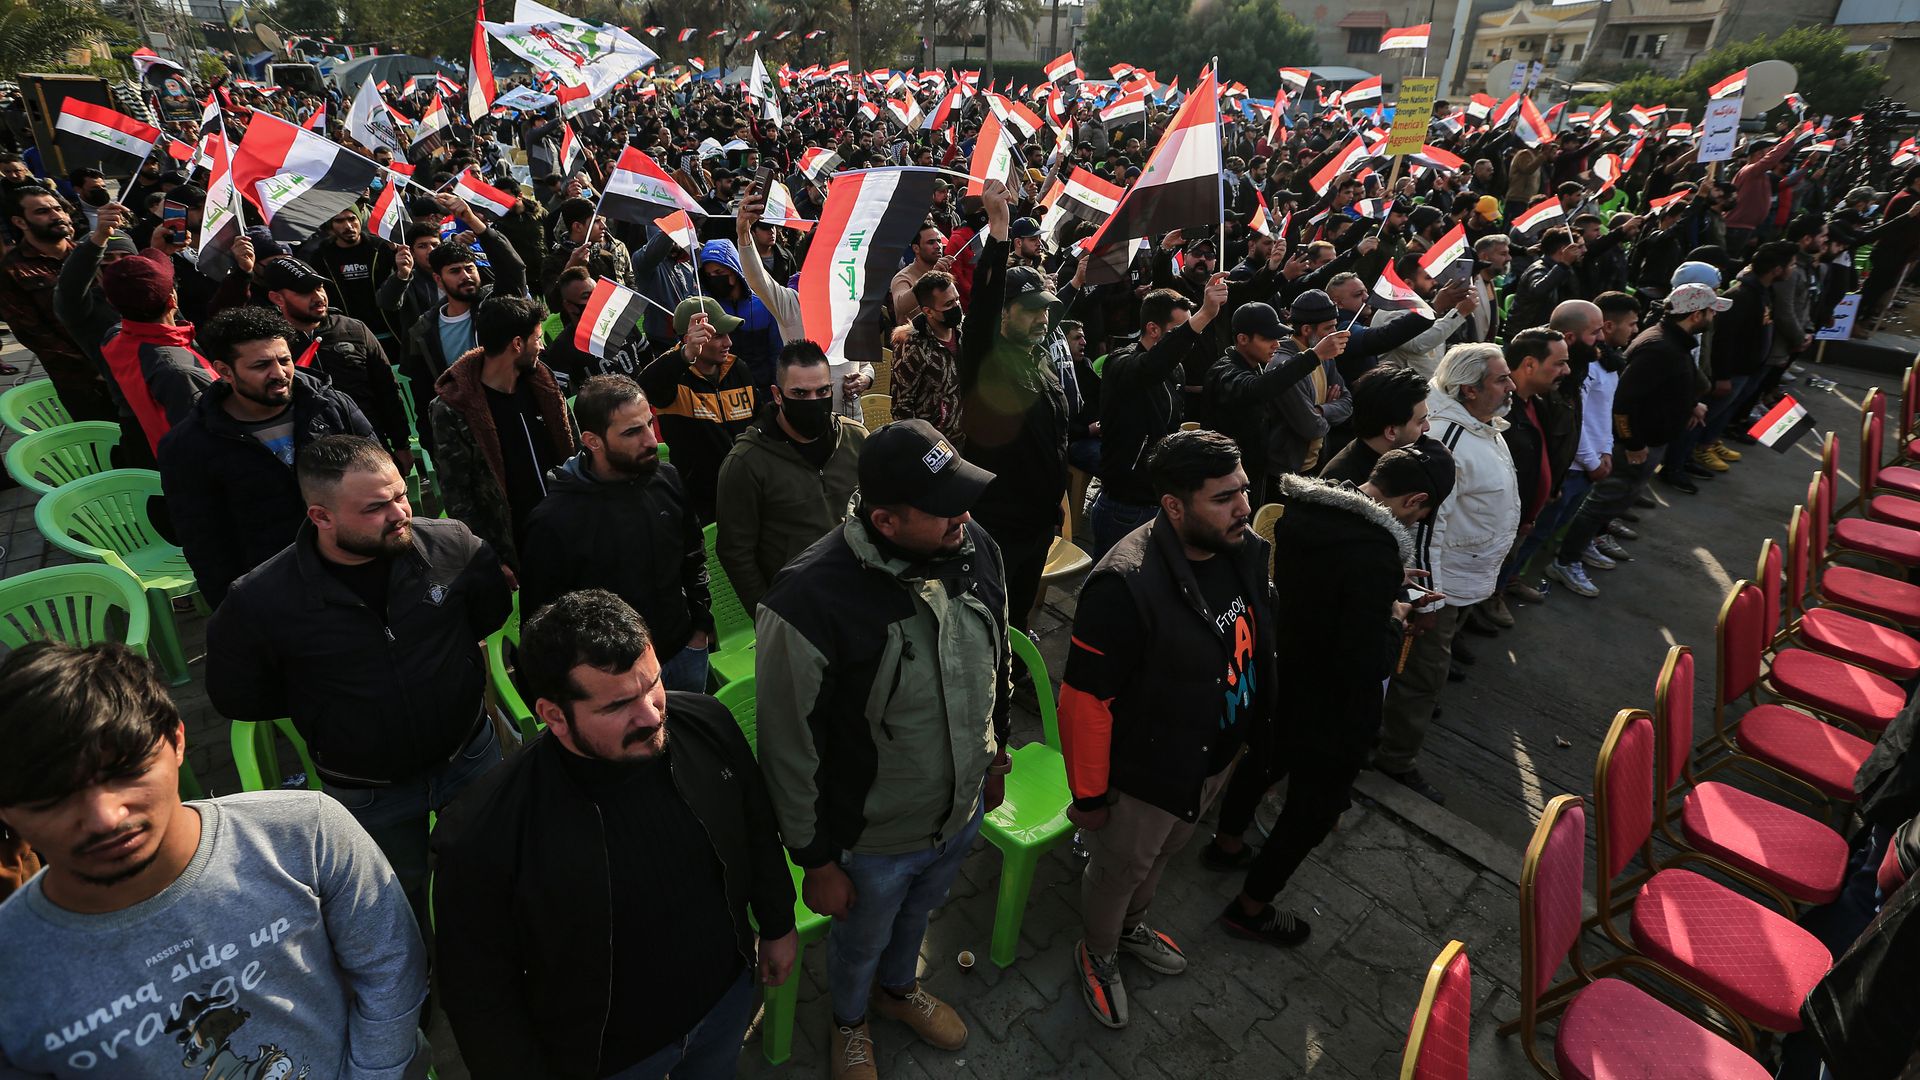 Supporters of Asa'ib Ahl al-Haq and Hezbollah Brigades groups rally in Baghdad, Iraq on Dec. 31, 2021. Photo: Ameer Al Mohammedaw/picture alliance via Getty Images